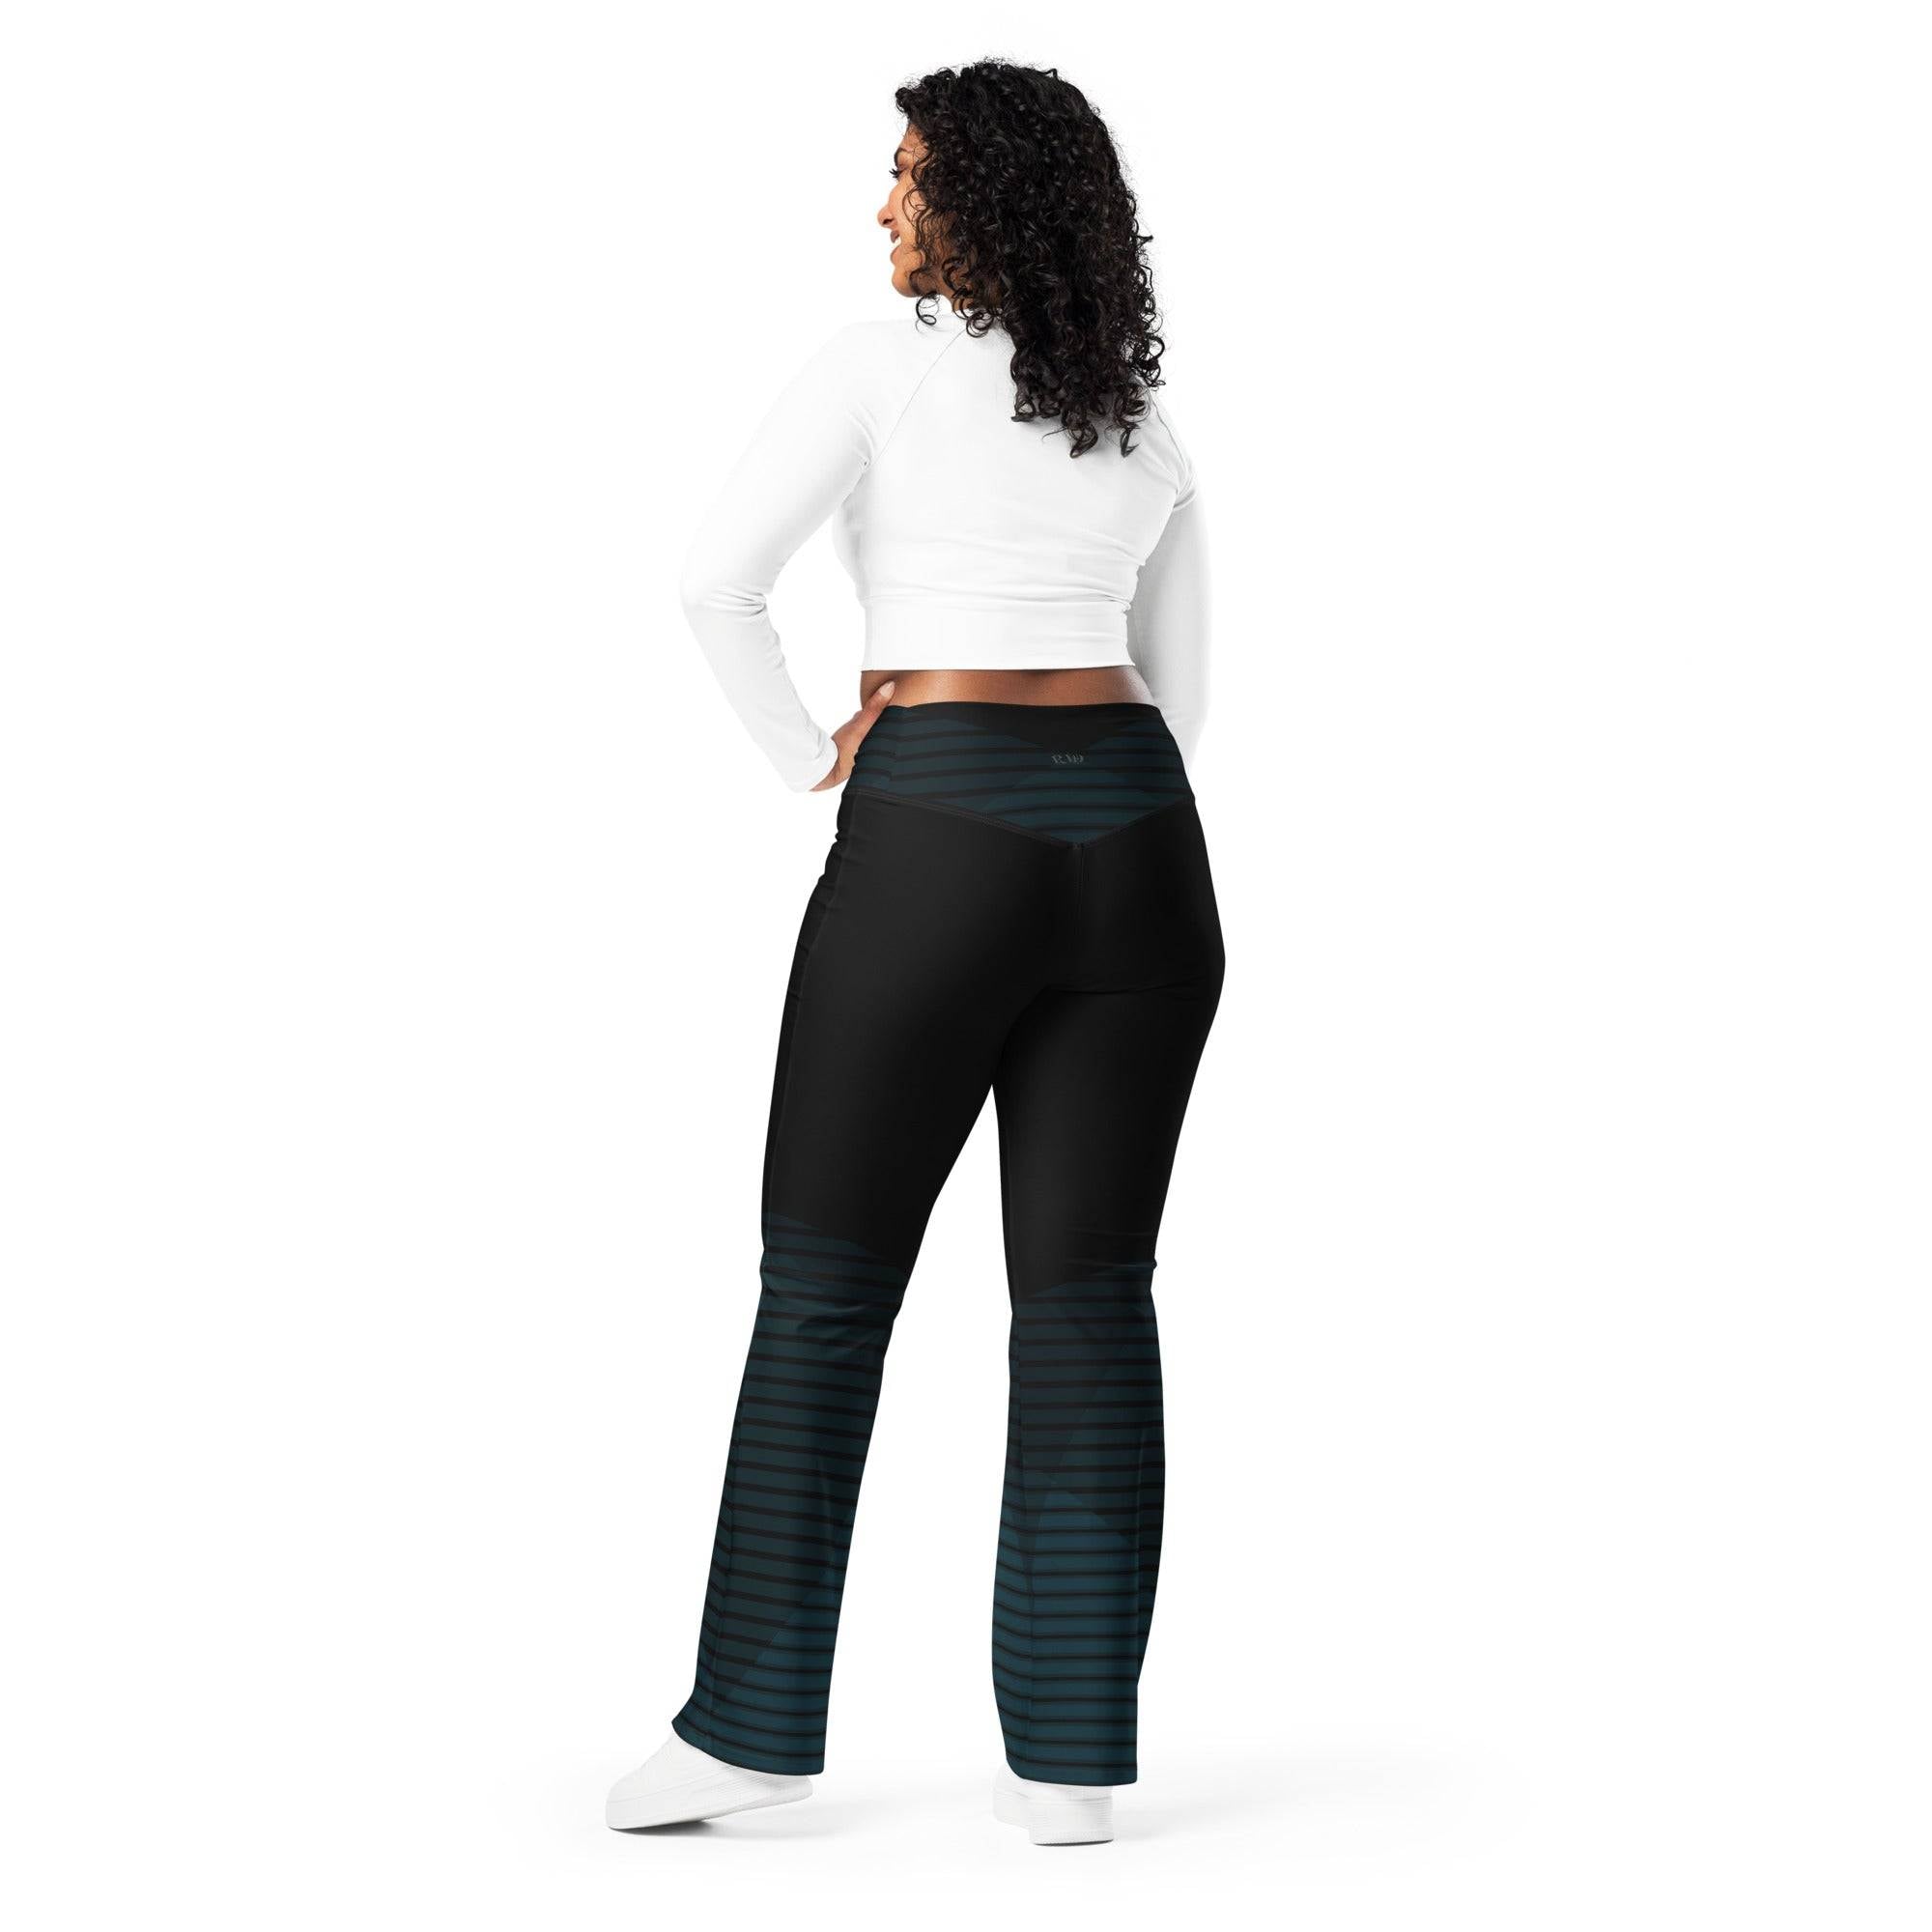 Black Flare Leggings with recycled polyester. Revive Wear's curve-hugging black flared leggings feature an on-trend flared cut that lifts and shapes. Shop from small to plus sizes with free shipping.